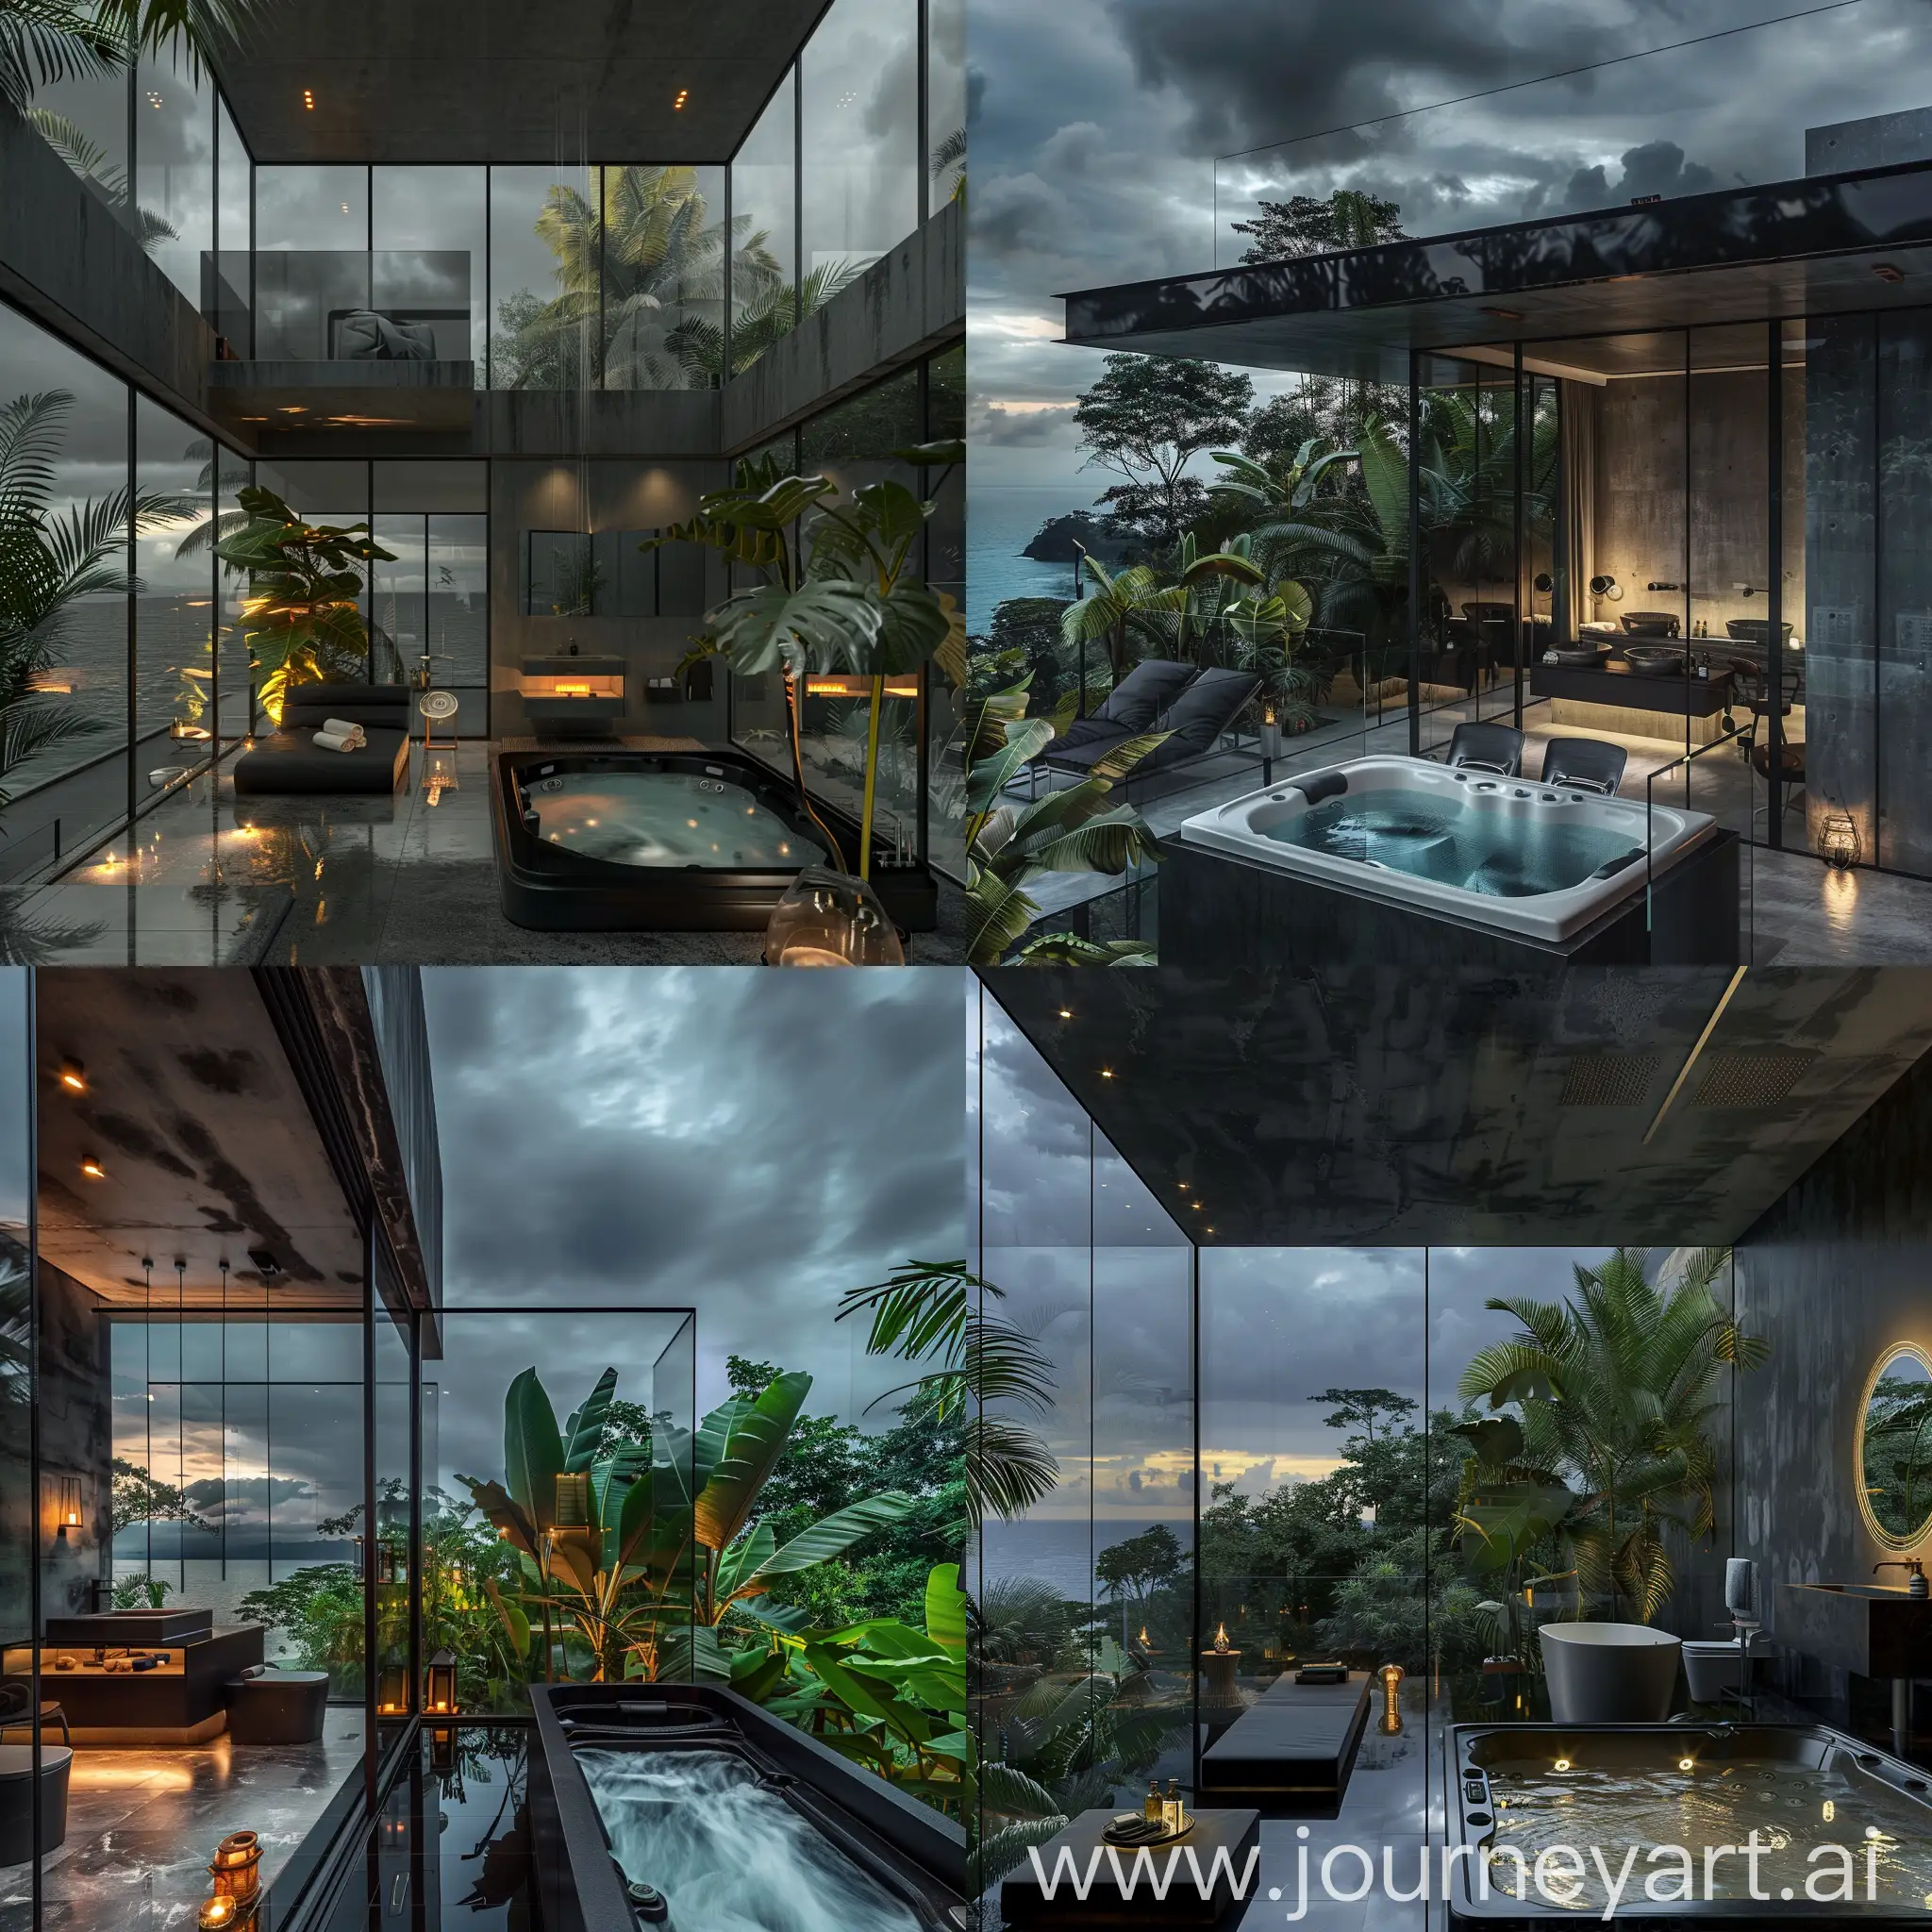 A modern glass bathroom with black, gray and concrete colors and a hot tub with a complete arrangement of furniture, decorated and soft lighting, a tall window wall,
In lush tropical forest with broad leaf trees and sea, heavy cloudy sky at night, real photo.